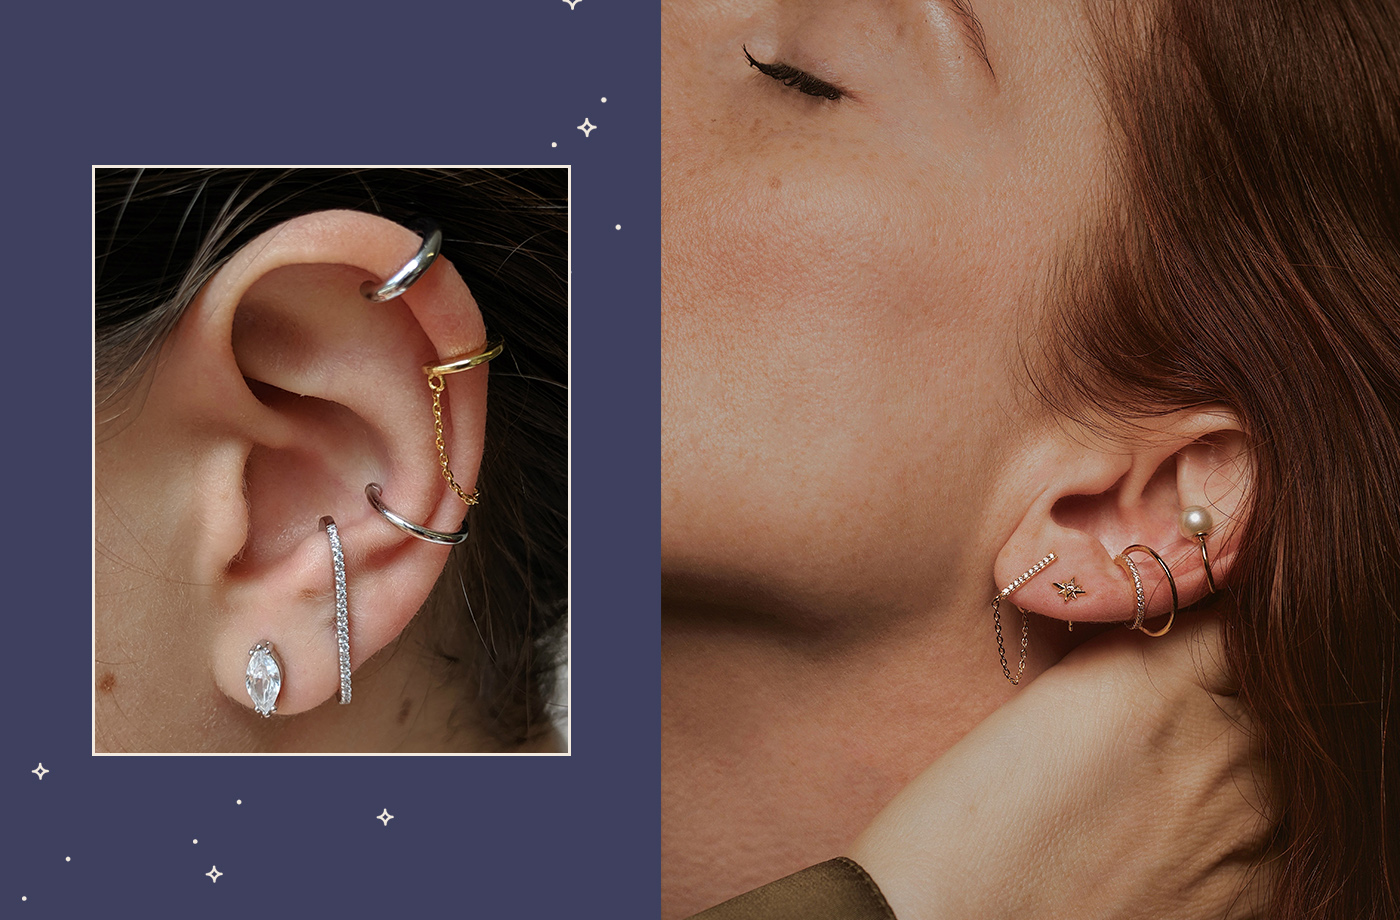 What Is a Constellation Piercing? Here 